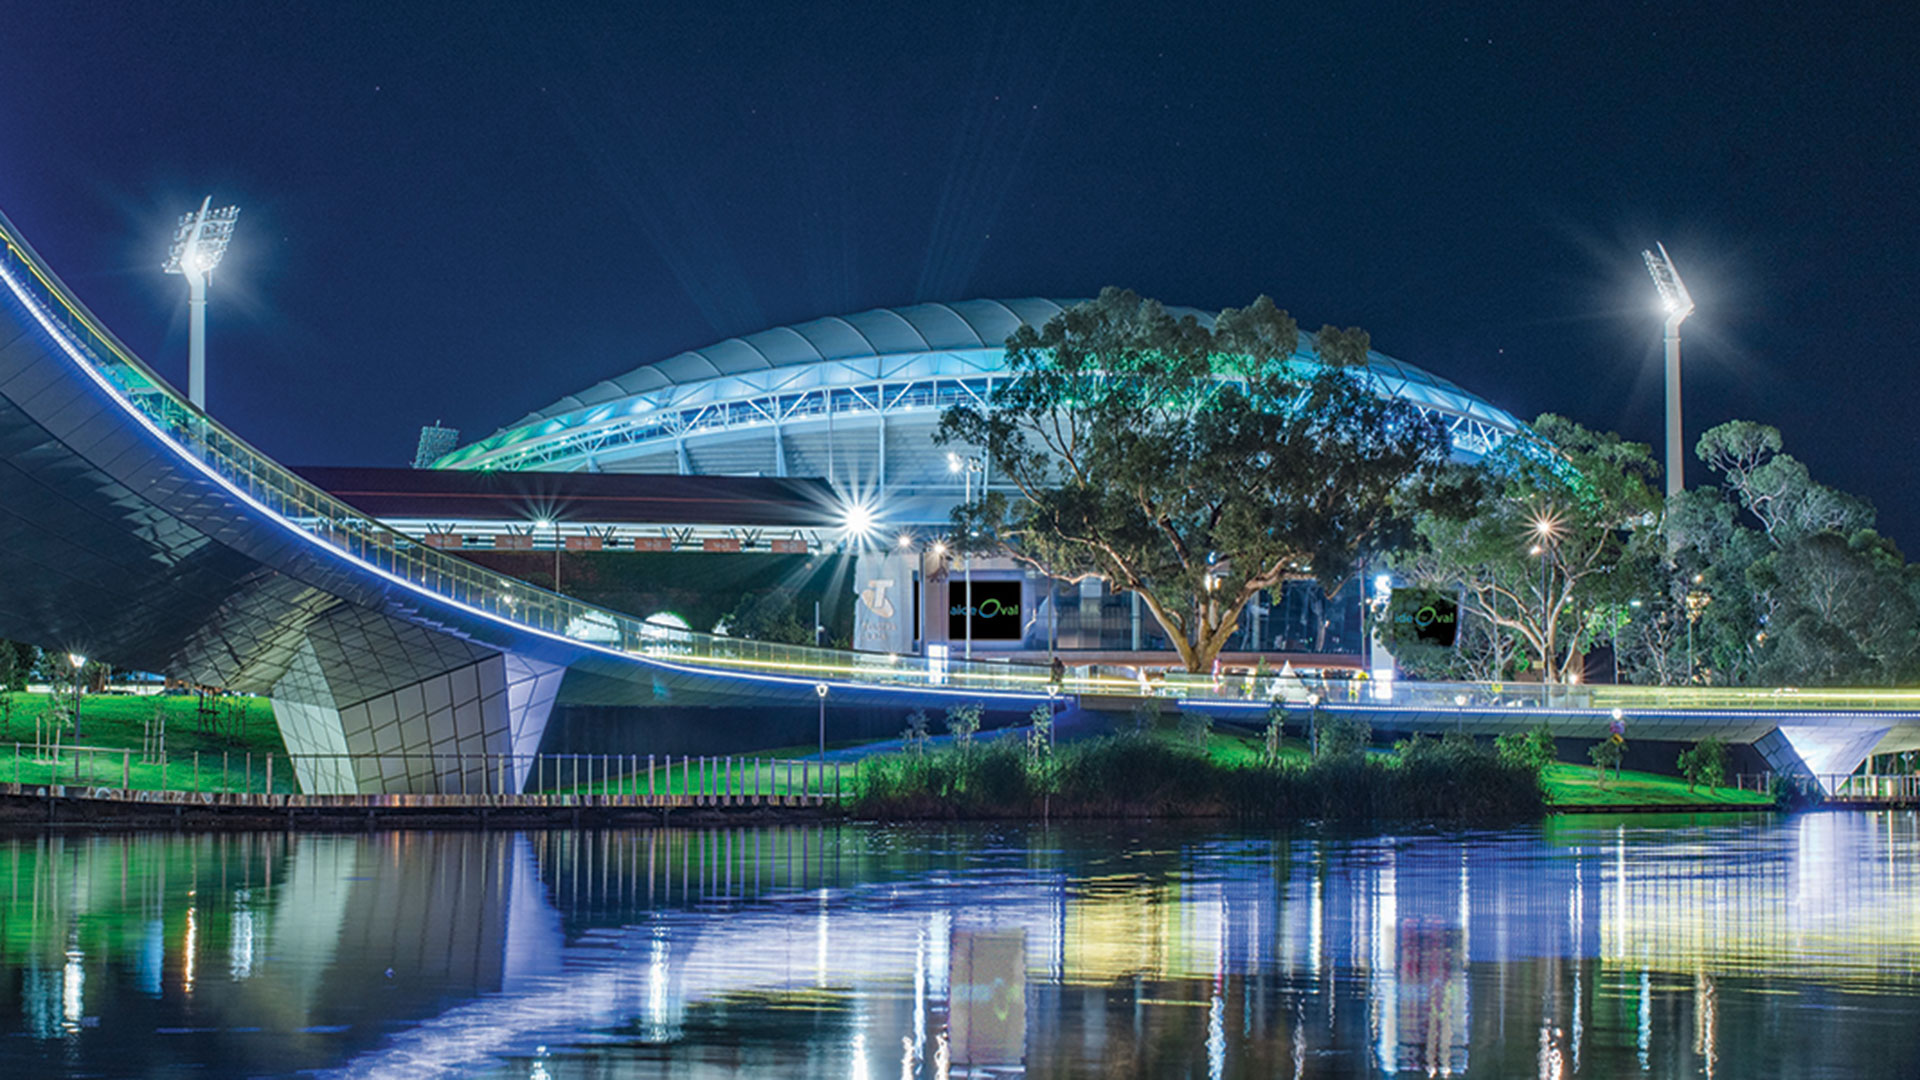 Adelaide Oval on the River Torrens